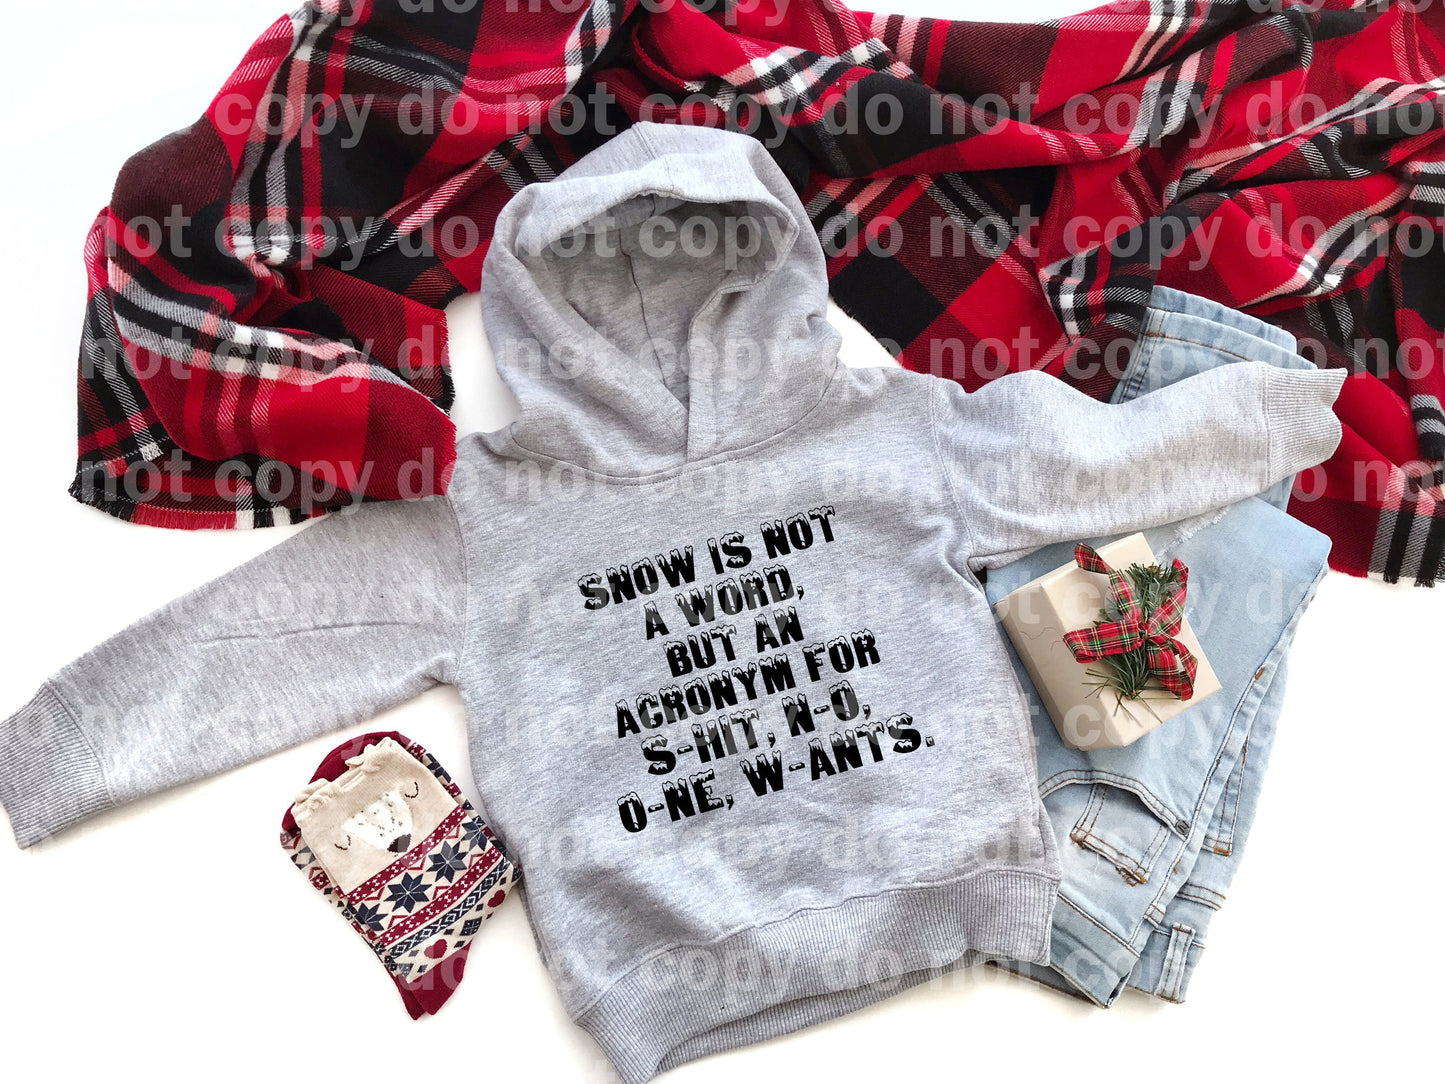 Snow Is Not A Word, But An Acronym For Shit No One Wants Dream Print or Sublimation Print